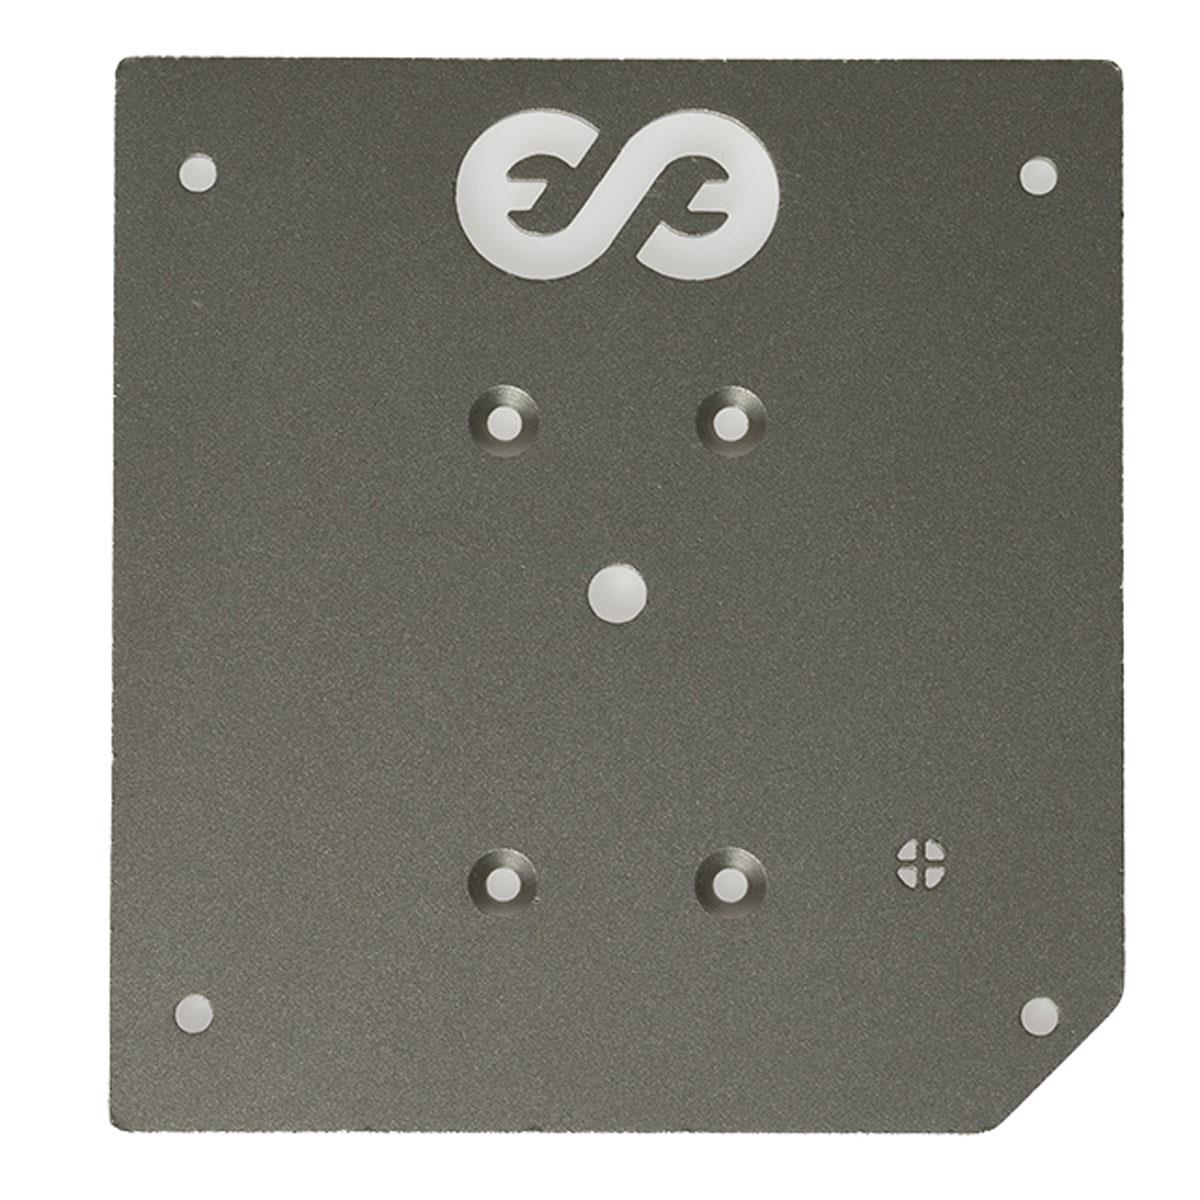 Image of Enlaps Stainless Steel Reinforcement Mounting Plate for Tikee 3